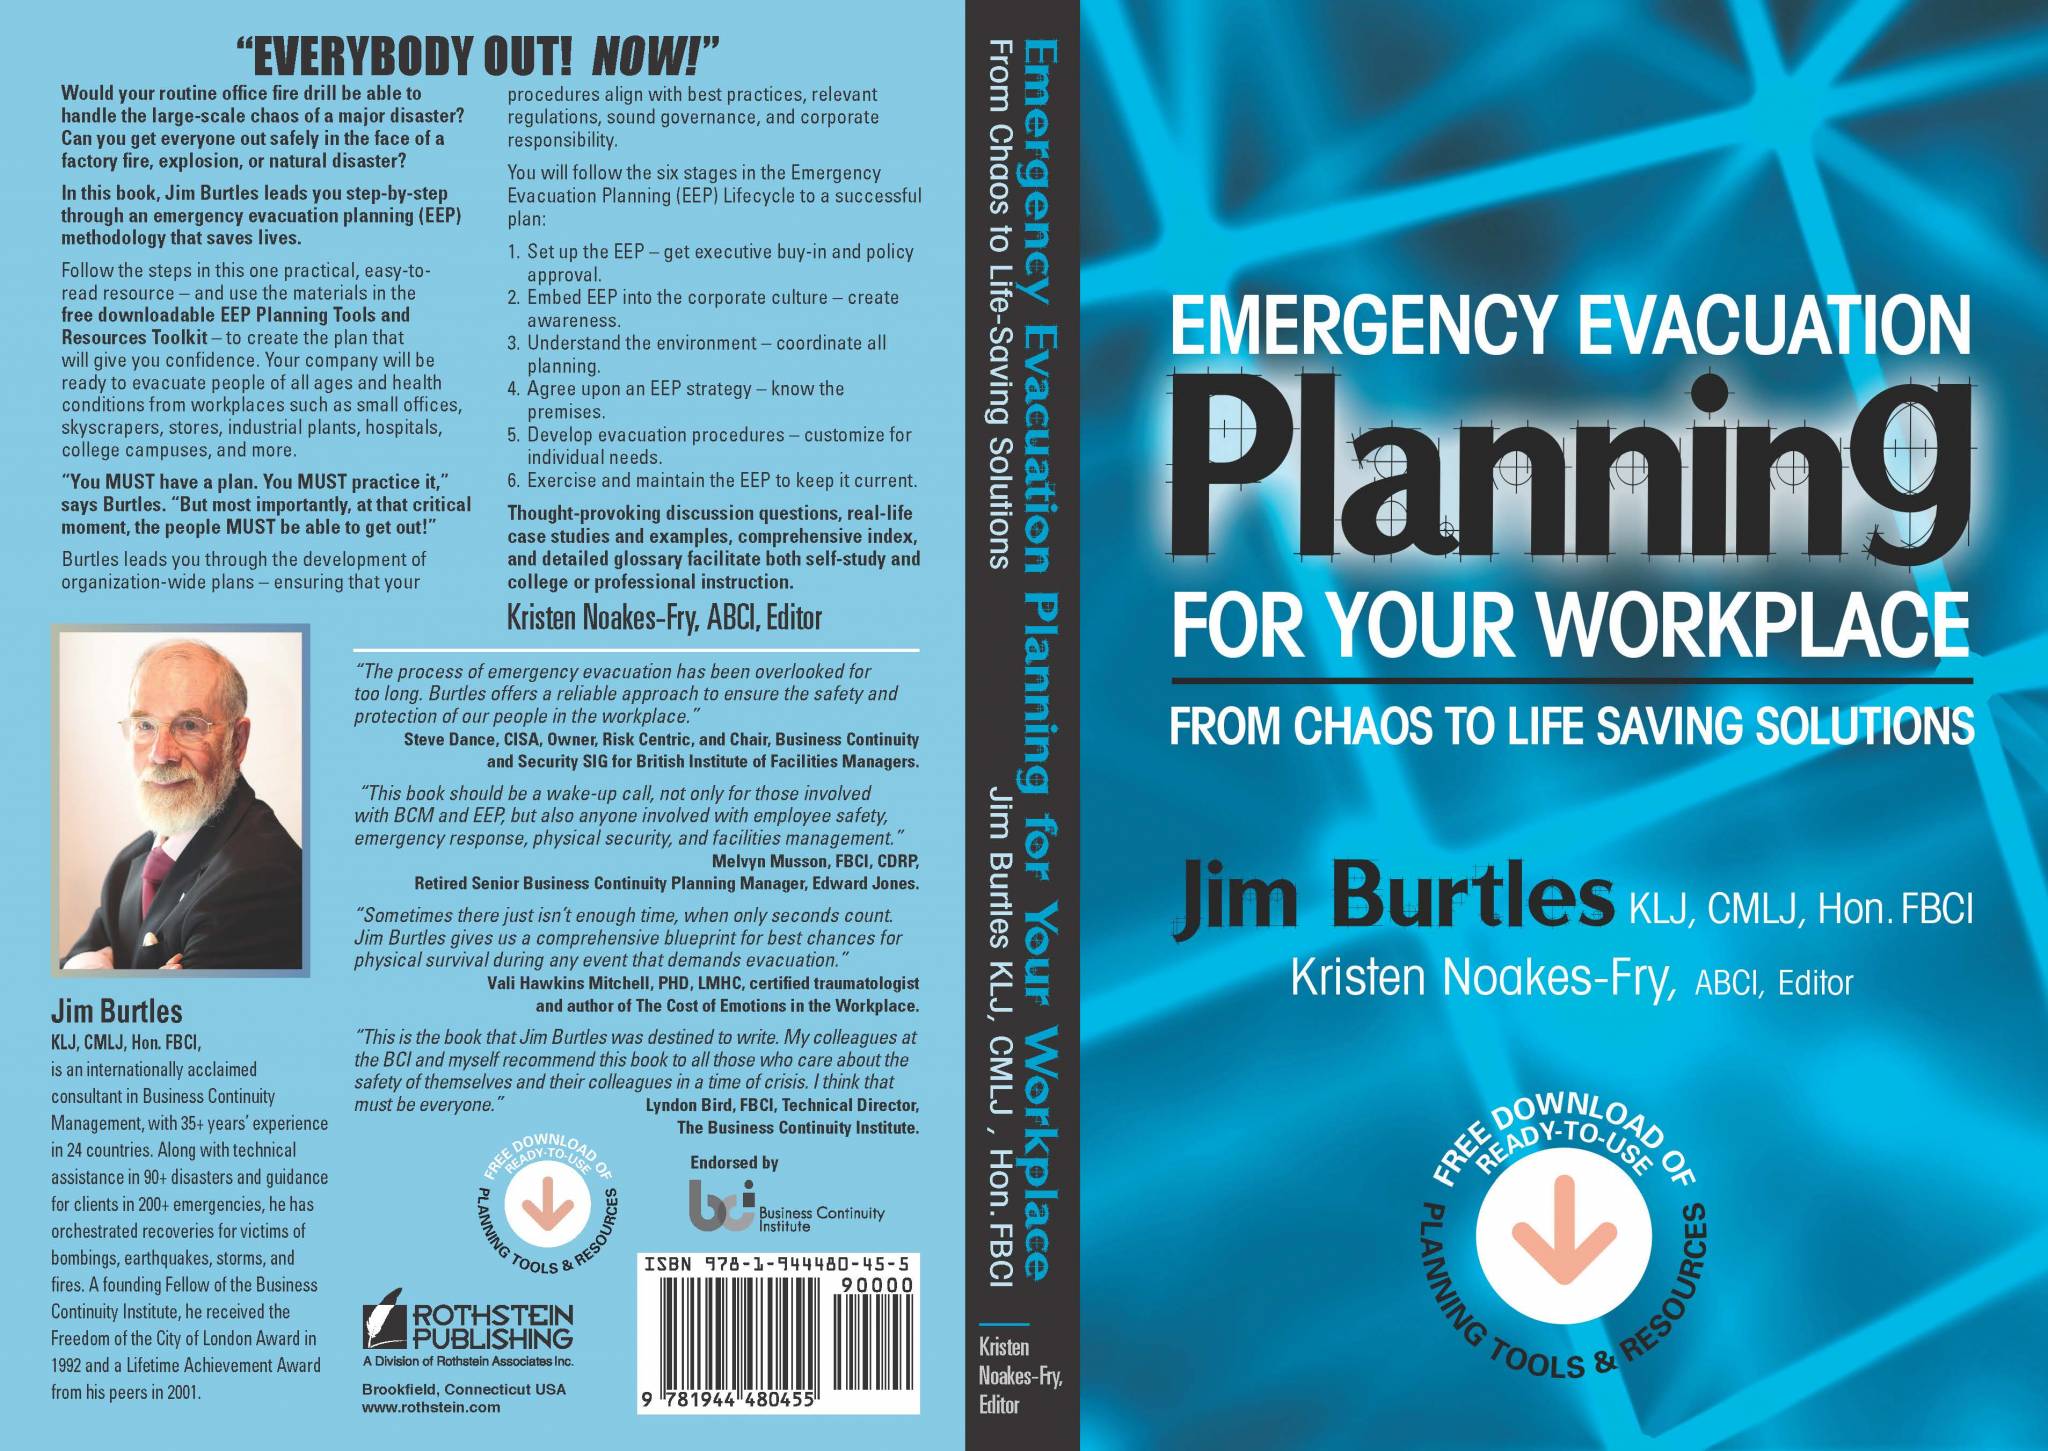 emergency-evacuation-planning-for-your-workplace-rothstein-publishing